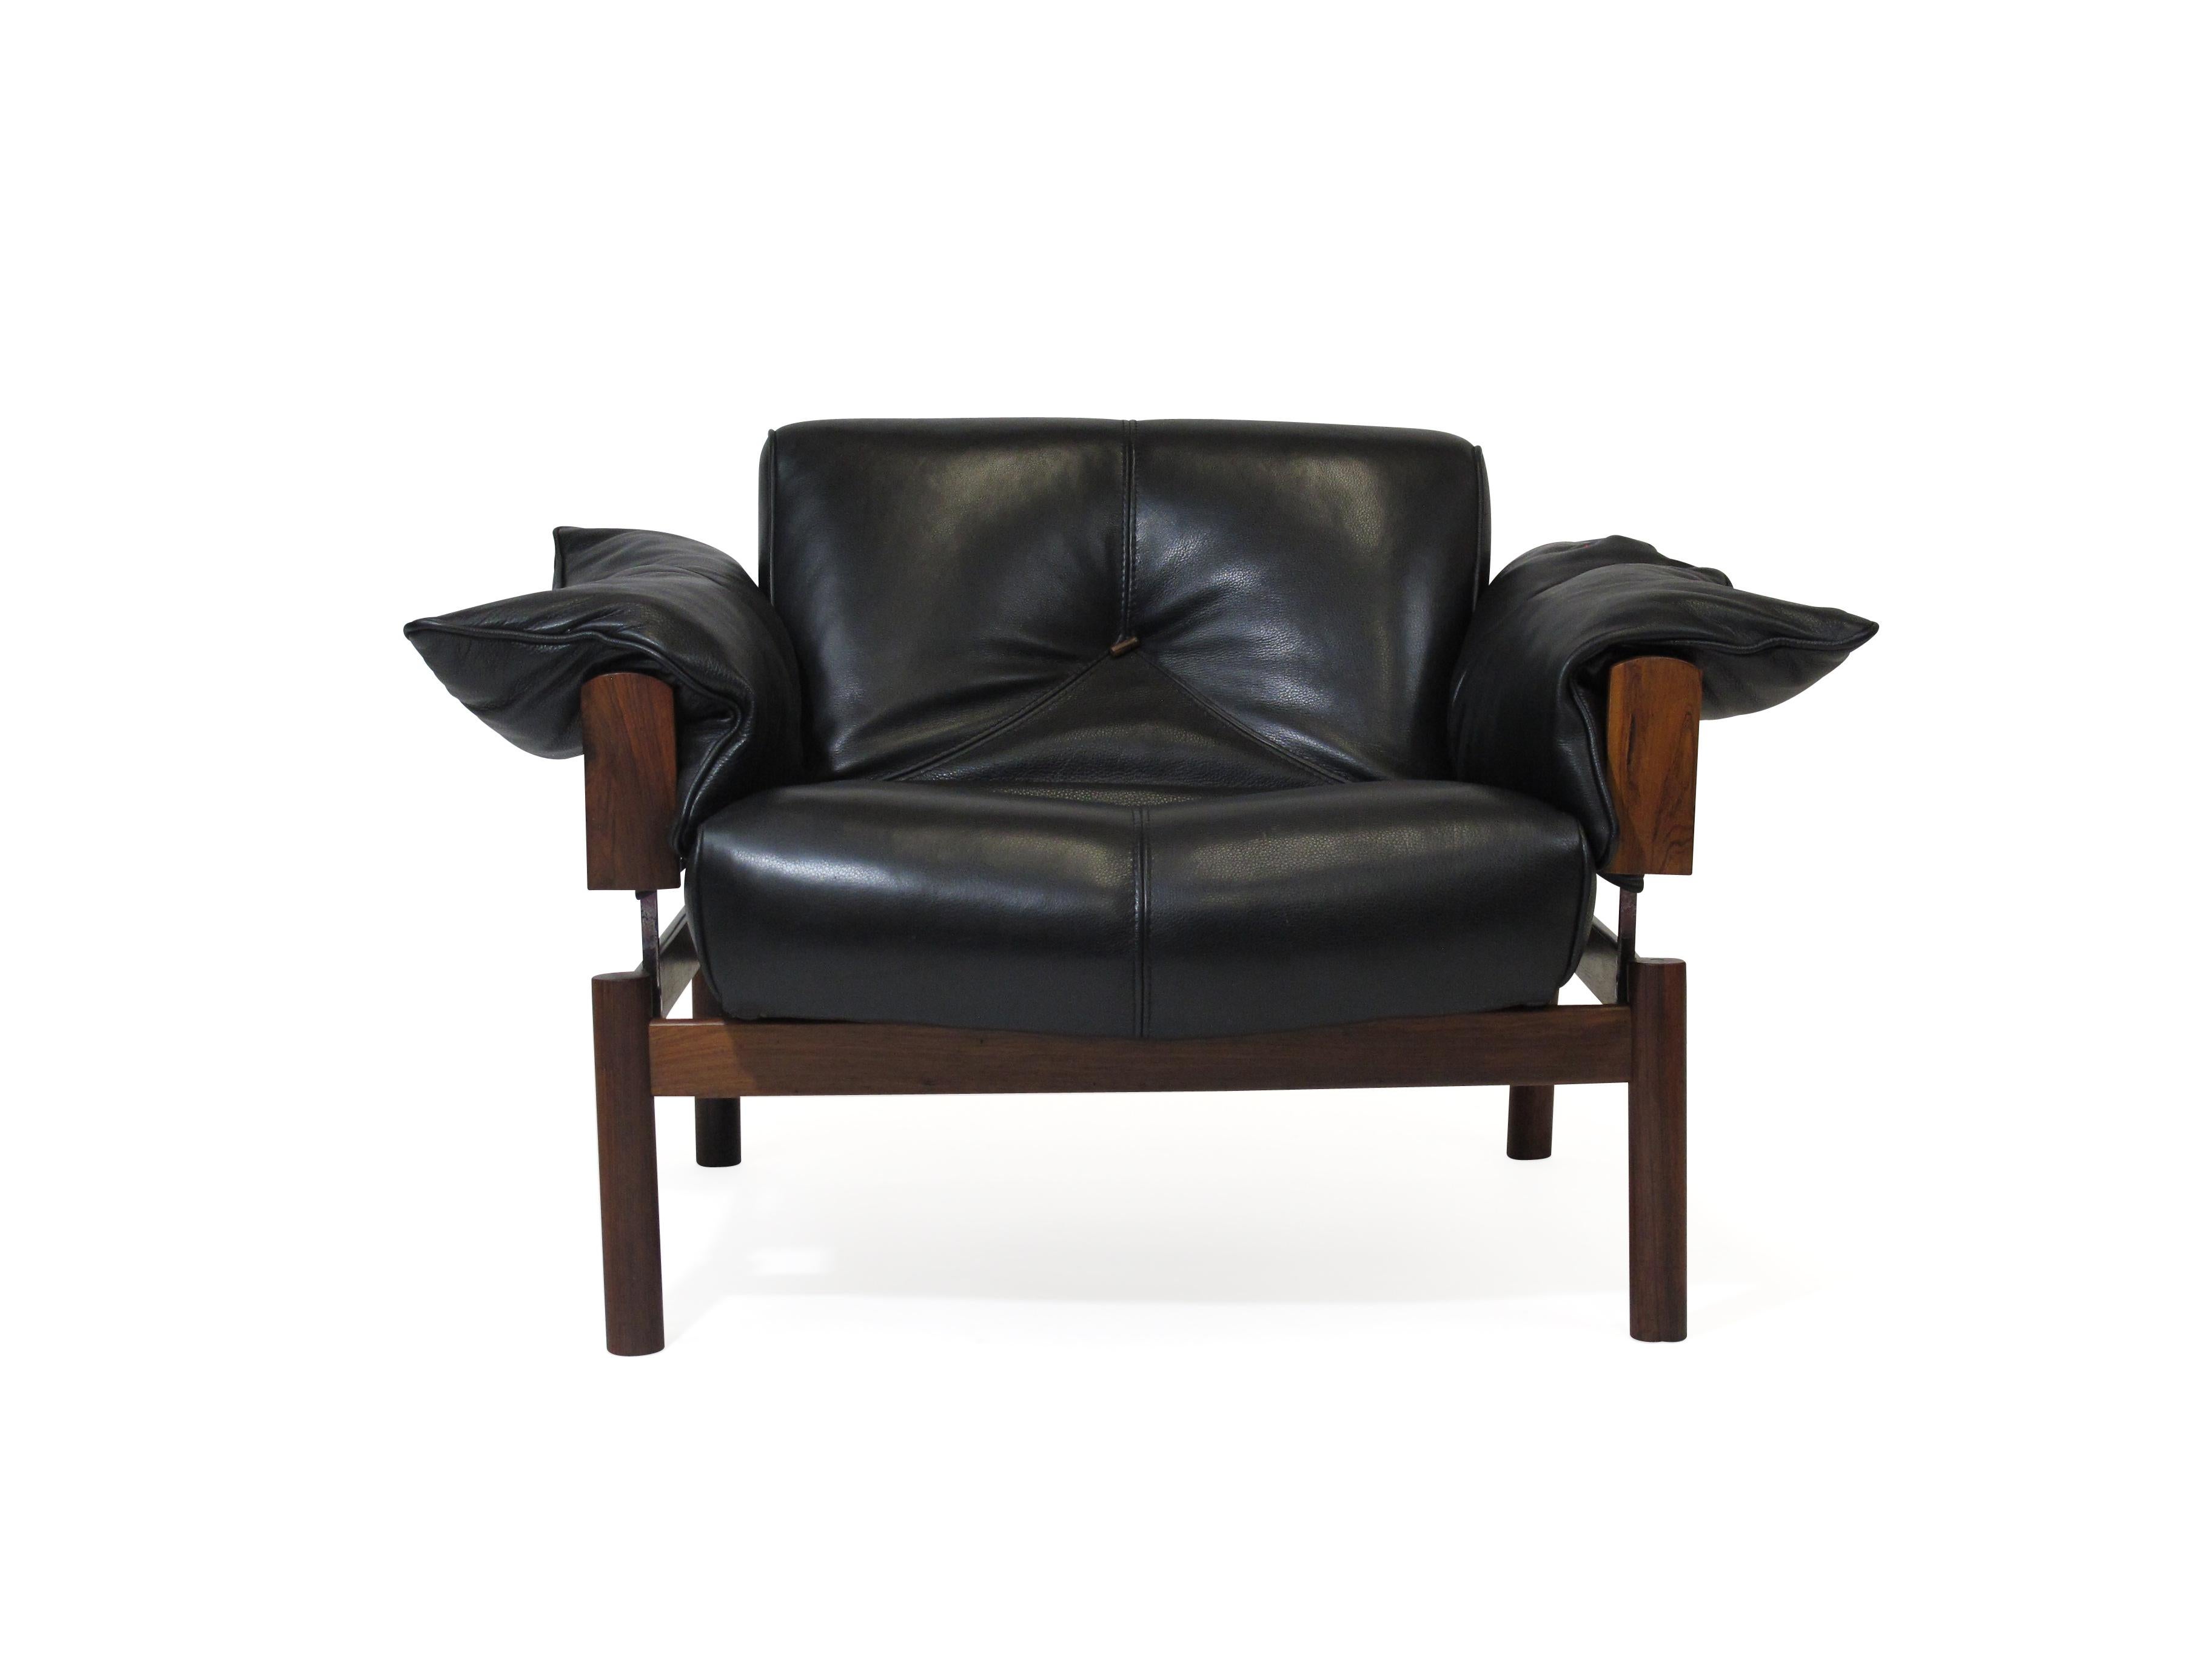 Brazilian modernist sofa and chair designed by Percival Lafer. Model MP-101, 103 is Lafer’s first sofa design created in 1960. The sofa and chair feature a stunning Brazilian rosewood structure with chrome supports. The sofa and chair has been newly